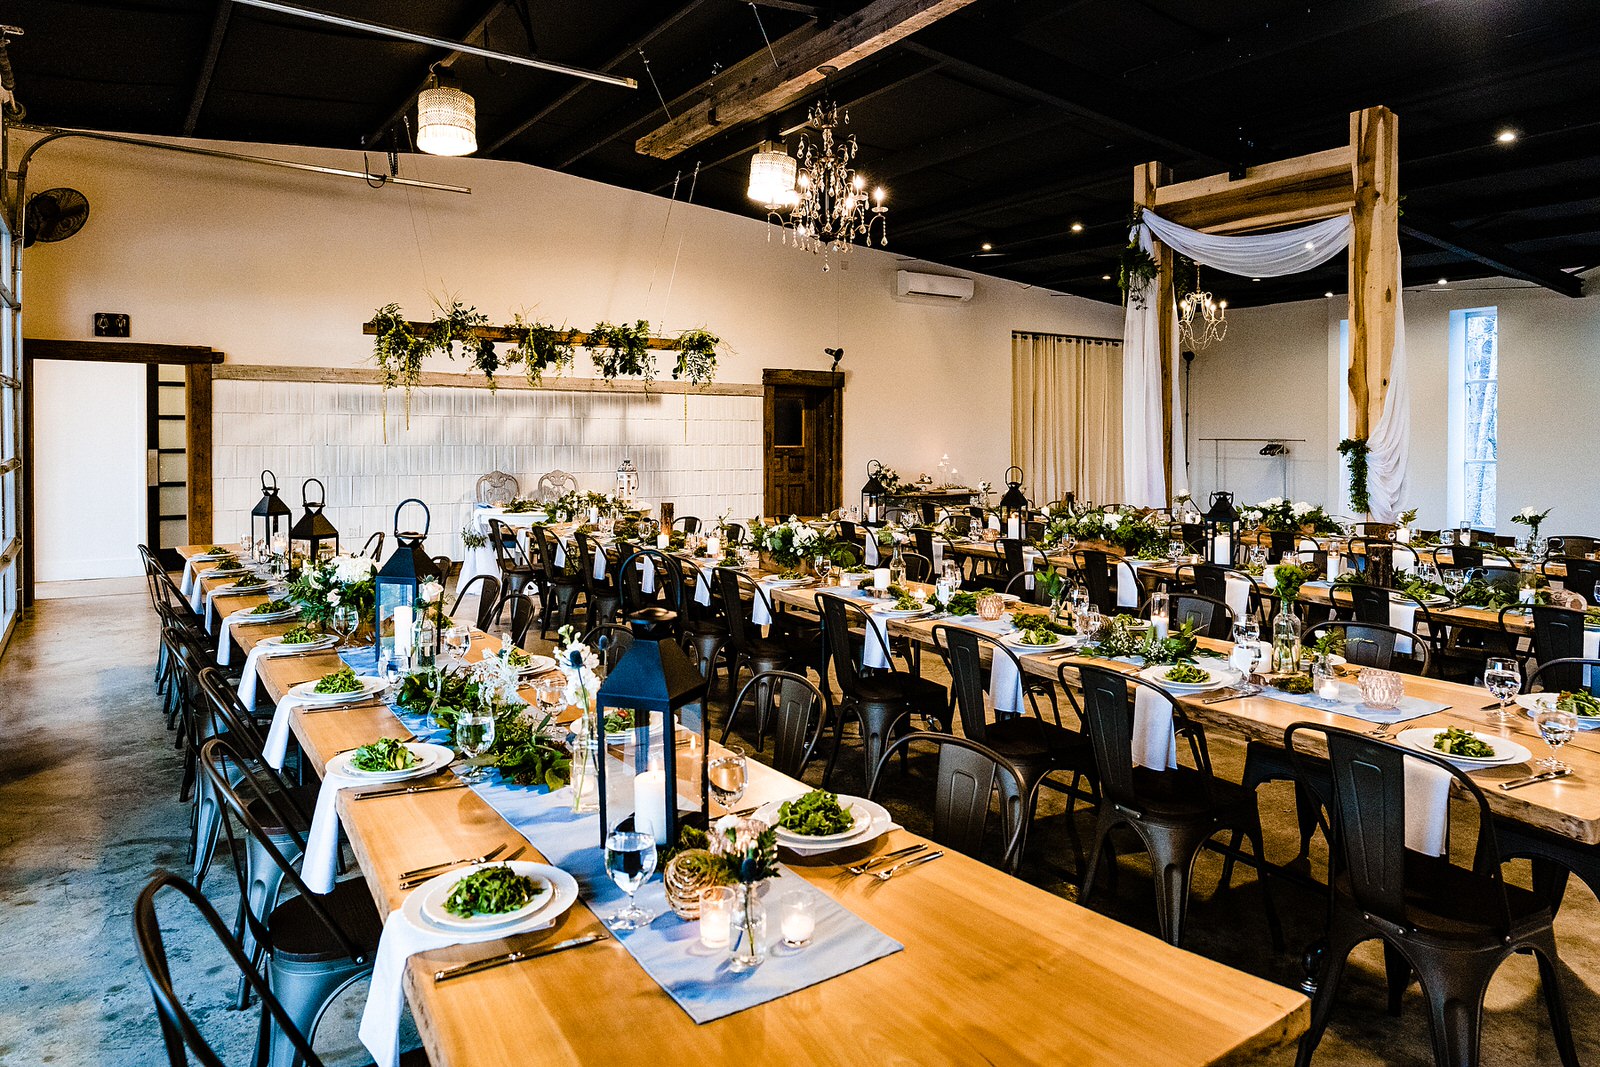 Green and white decor at The Meadows Raleigh wedding reception by Raleigh wedding photographers